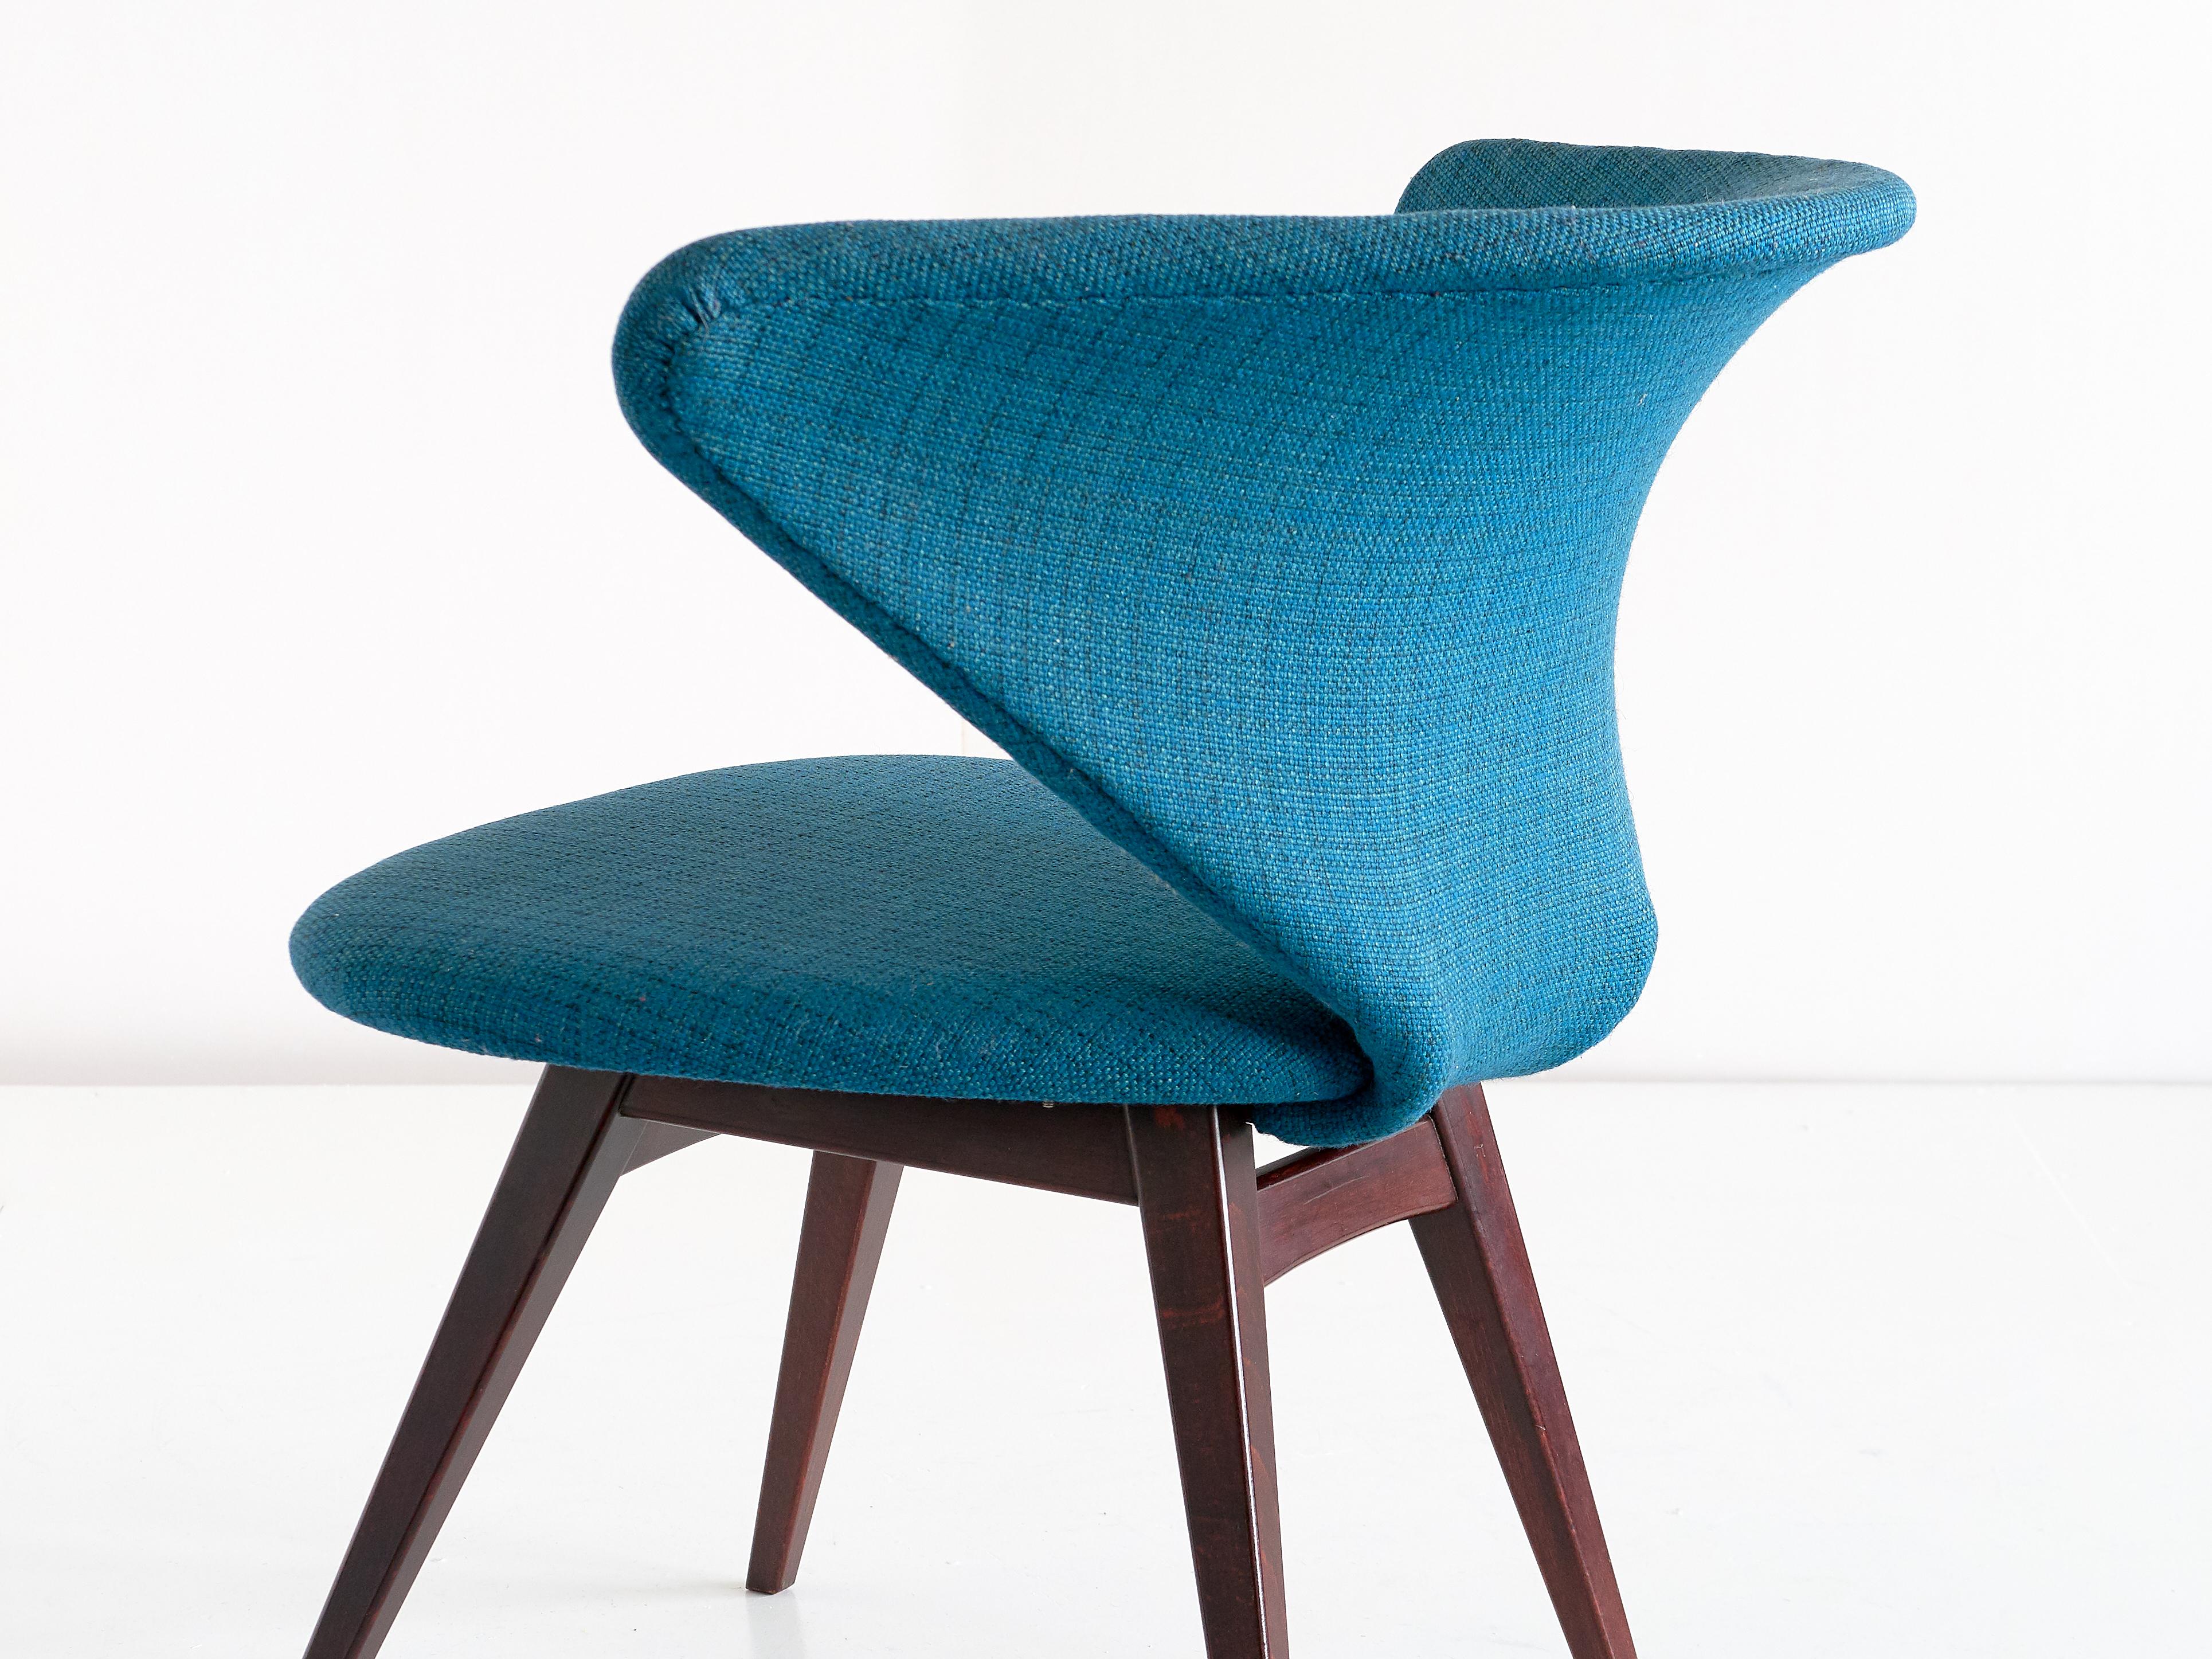 Sigfrid Ljungqvist Wing Shaped Chair, Petrol Blue Fabric and Beech, Sweden, 1958 For Sale 3